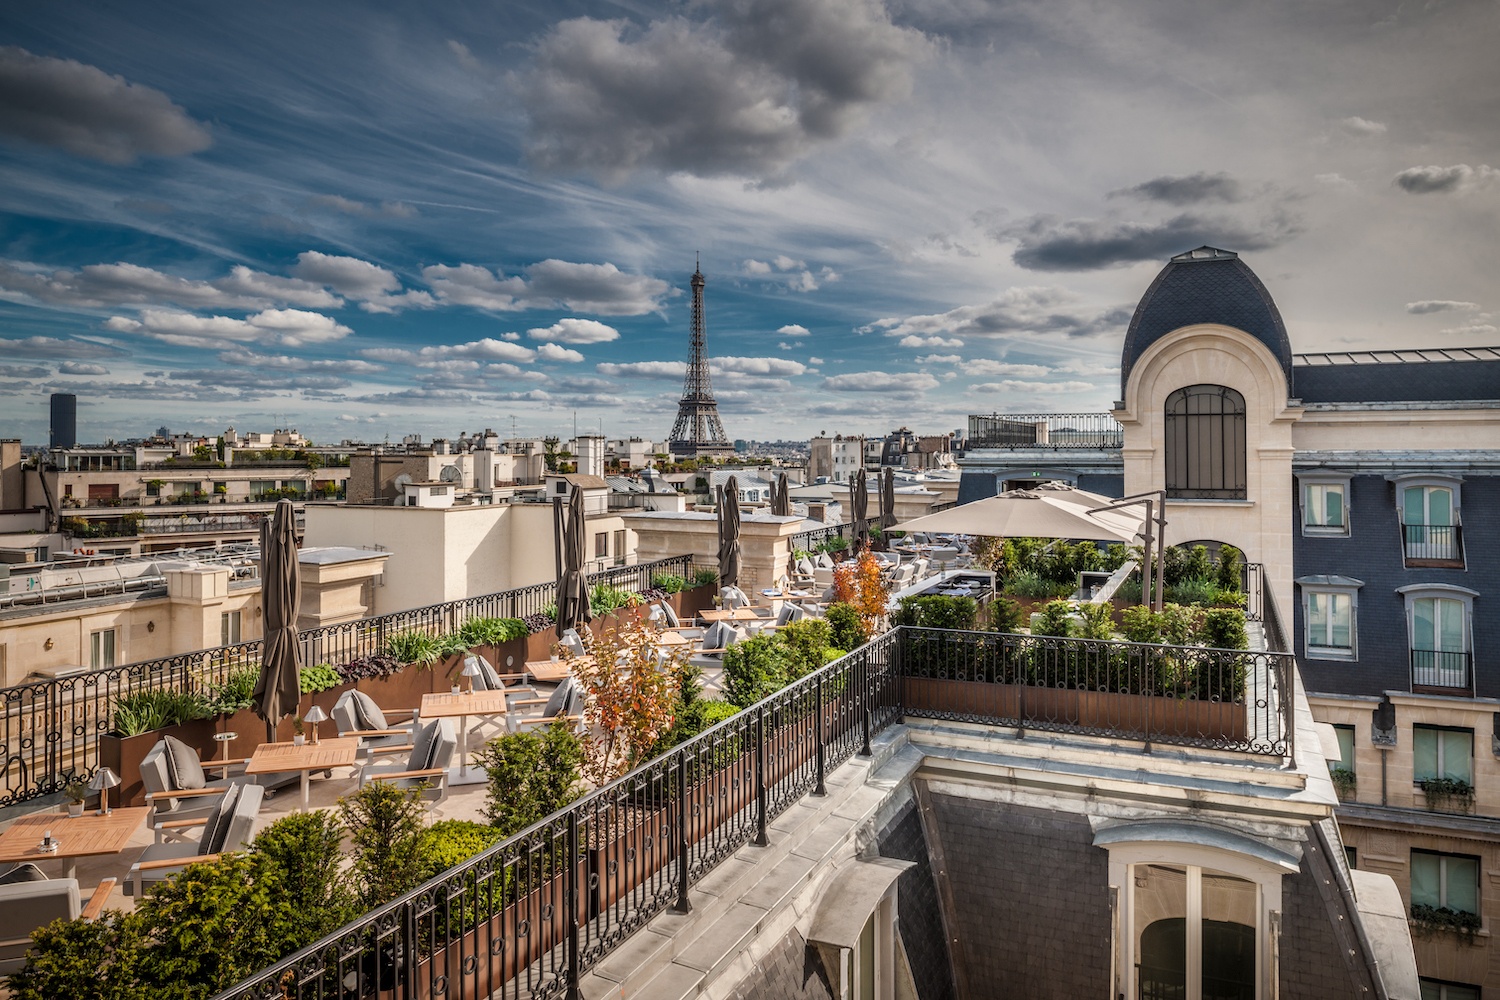 18 Best Hotels in Paris with Eiffel tower view [2023] - tosomeplacenew